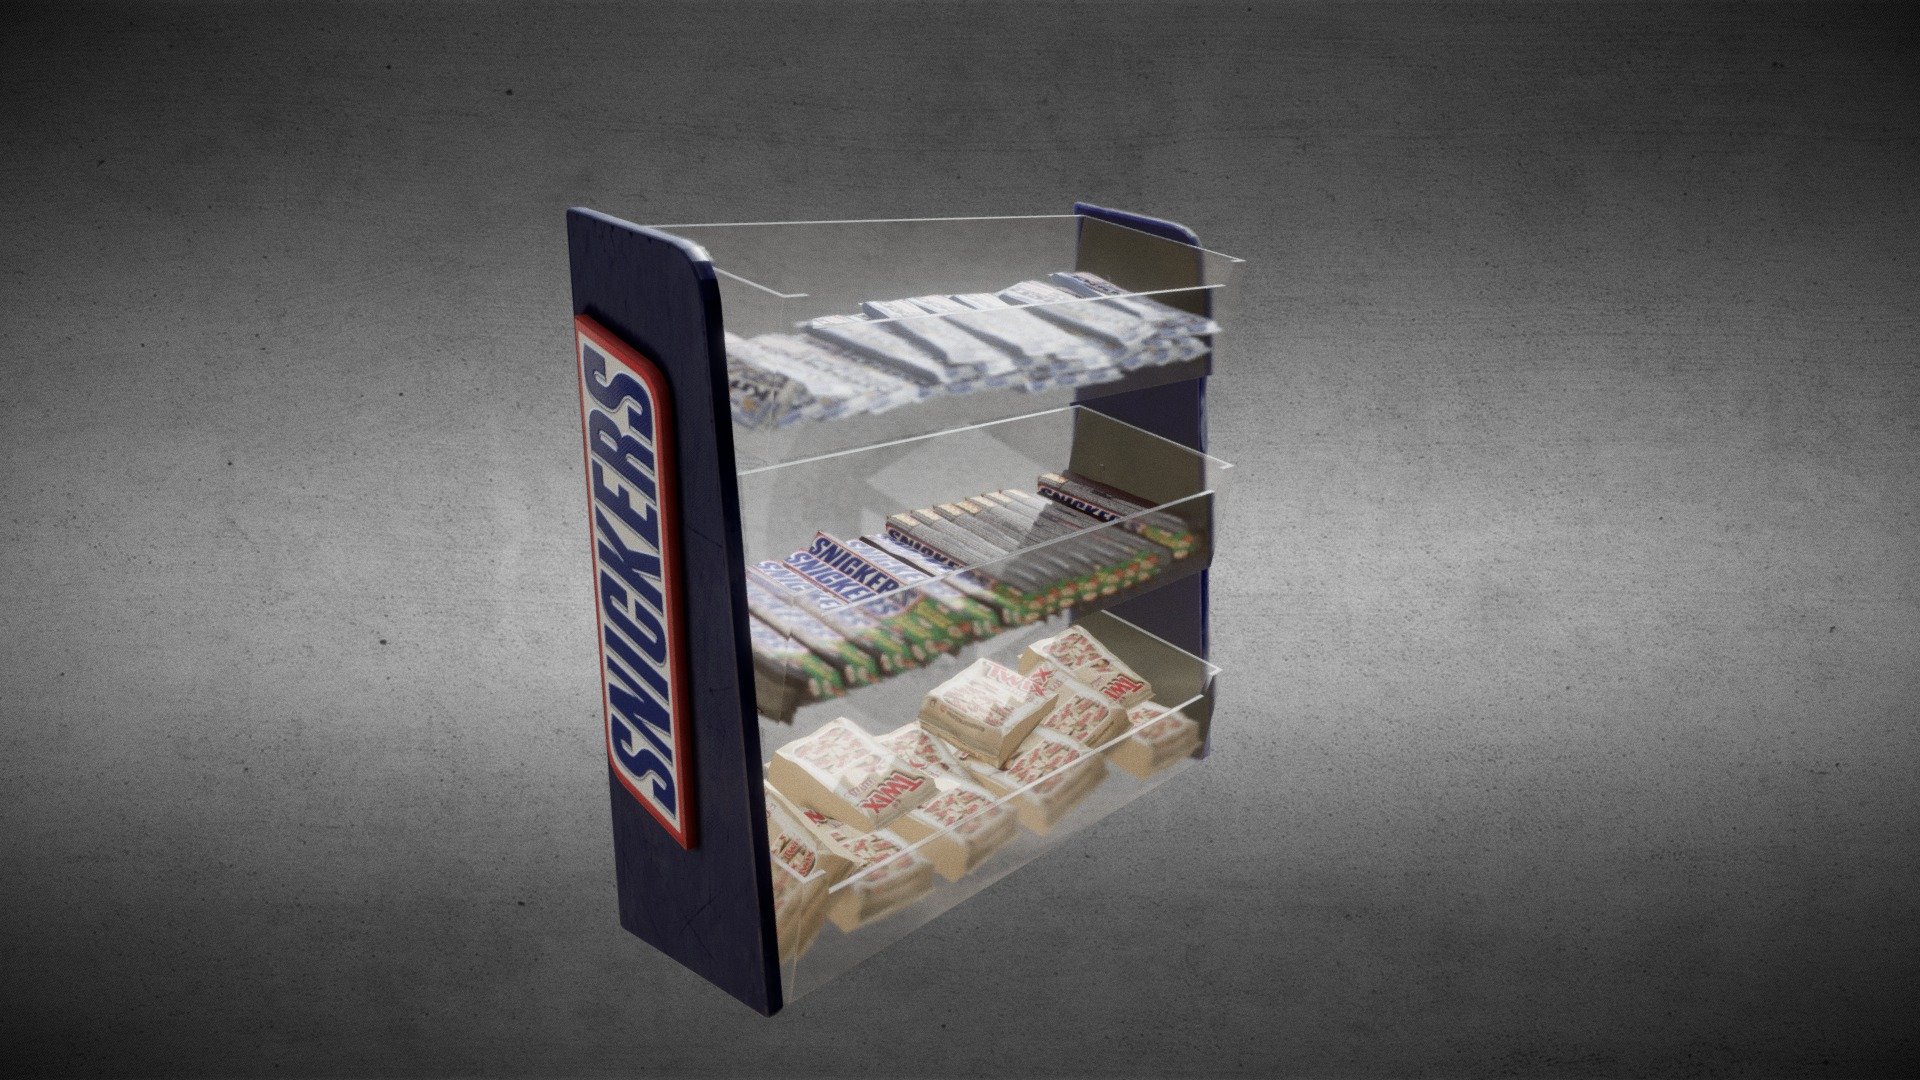 SNICKERS Snack Box, PBR
Low Poly and Game Redy
Appeared in the Coin Toss Scene in No Country for Old Men - SNICKERS Snack Box - 3D model by Li.Wenzhao 3d model